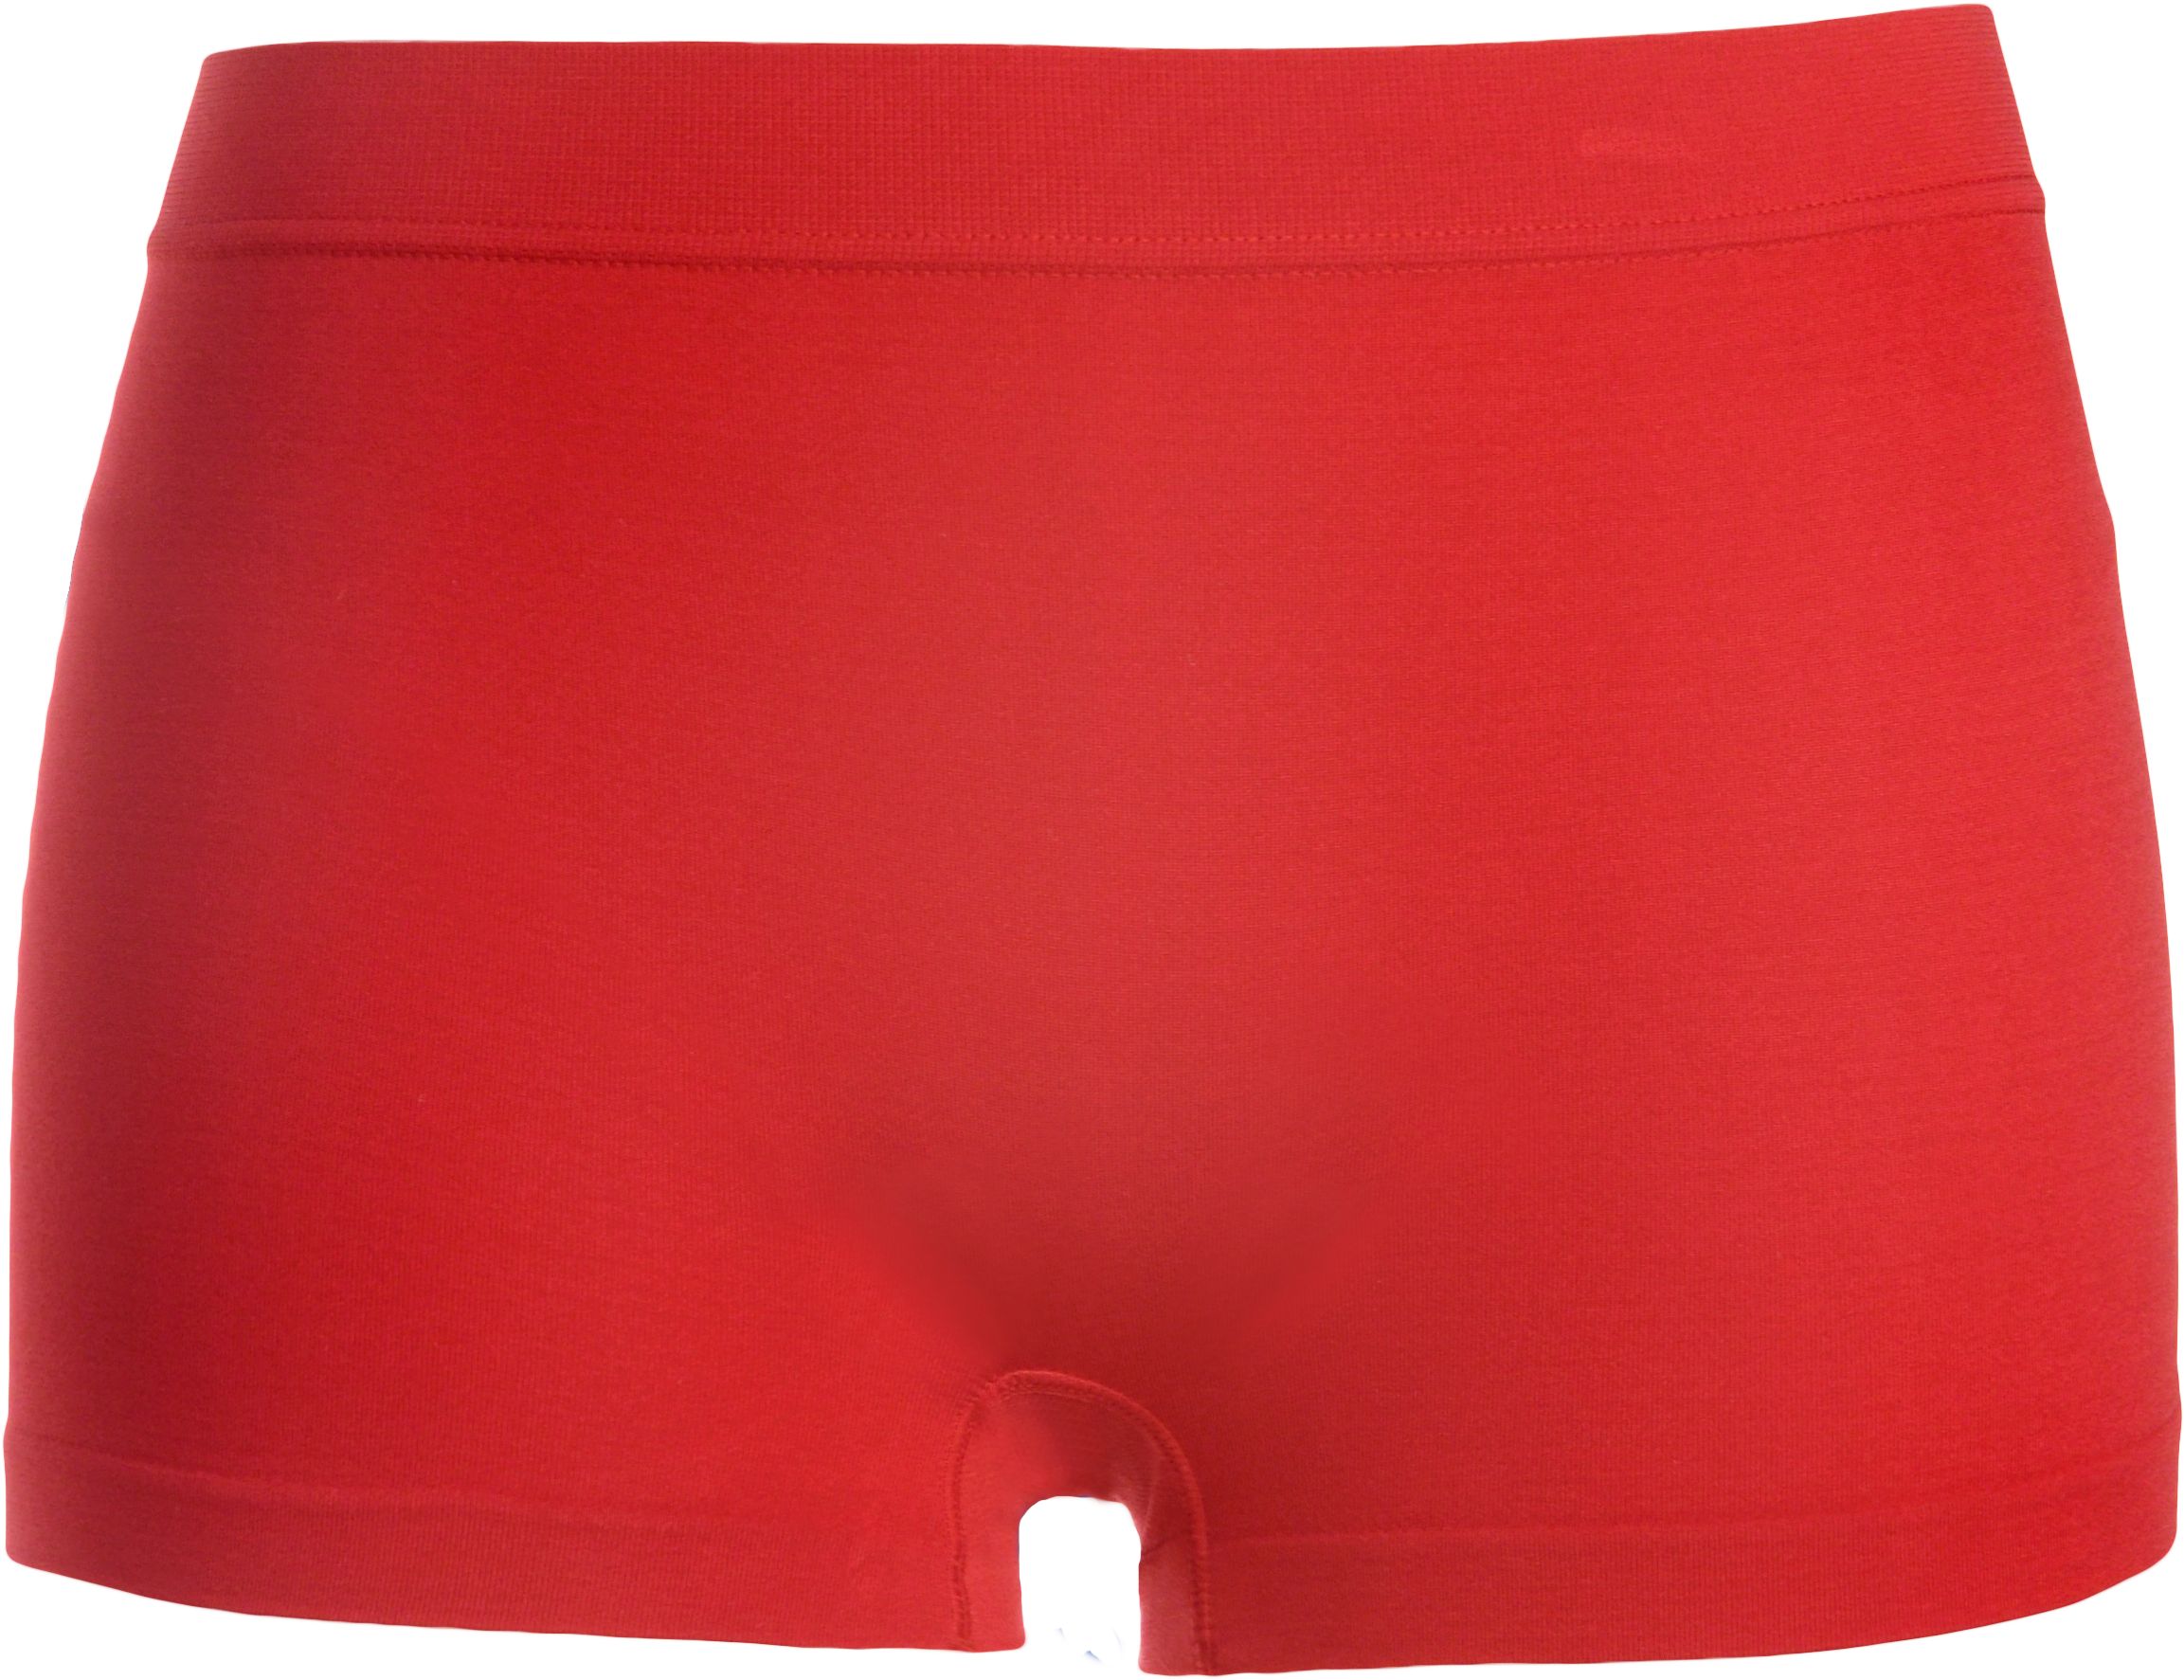 Adult Boyshorts with Stretch & Elastic Waist, Red, One Size, Wearable  Costume Accessory for Halloween